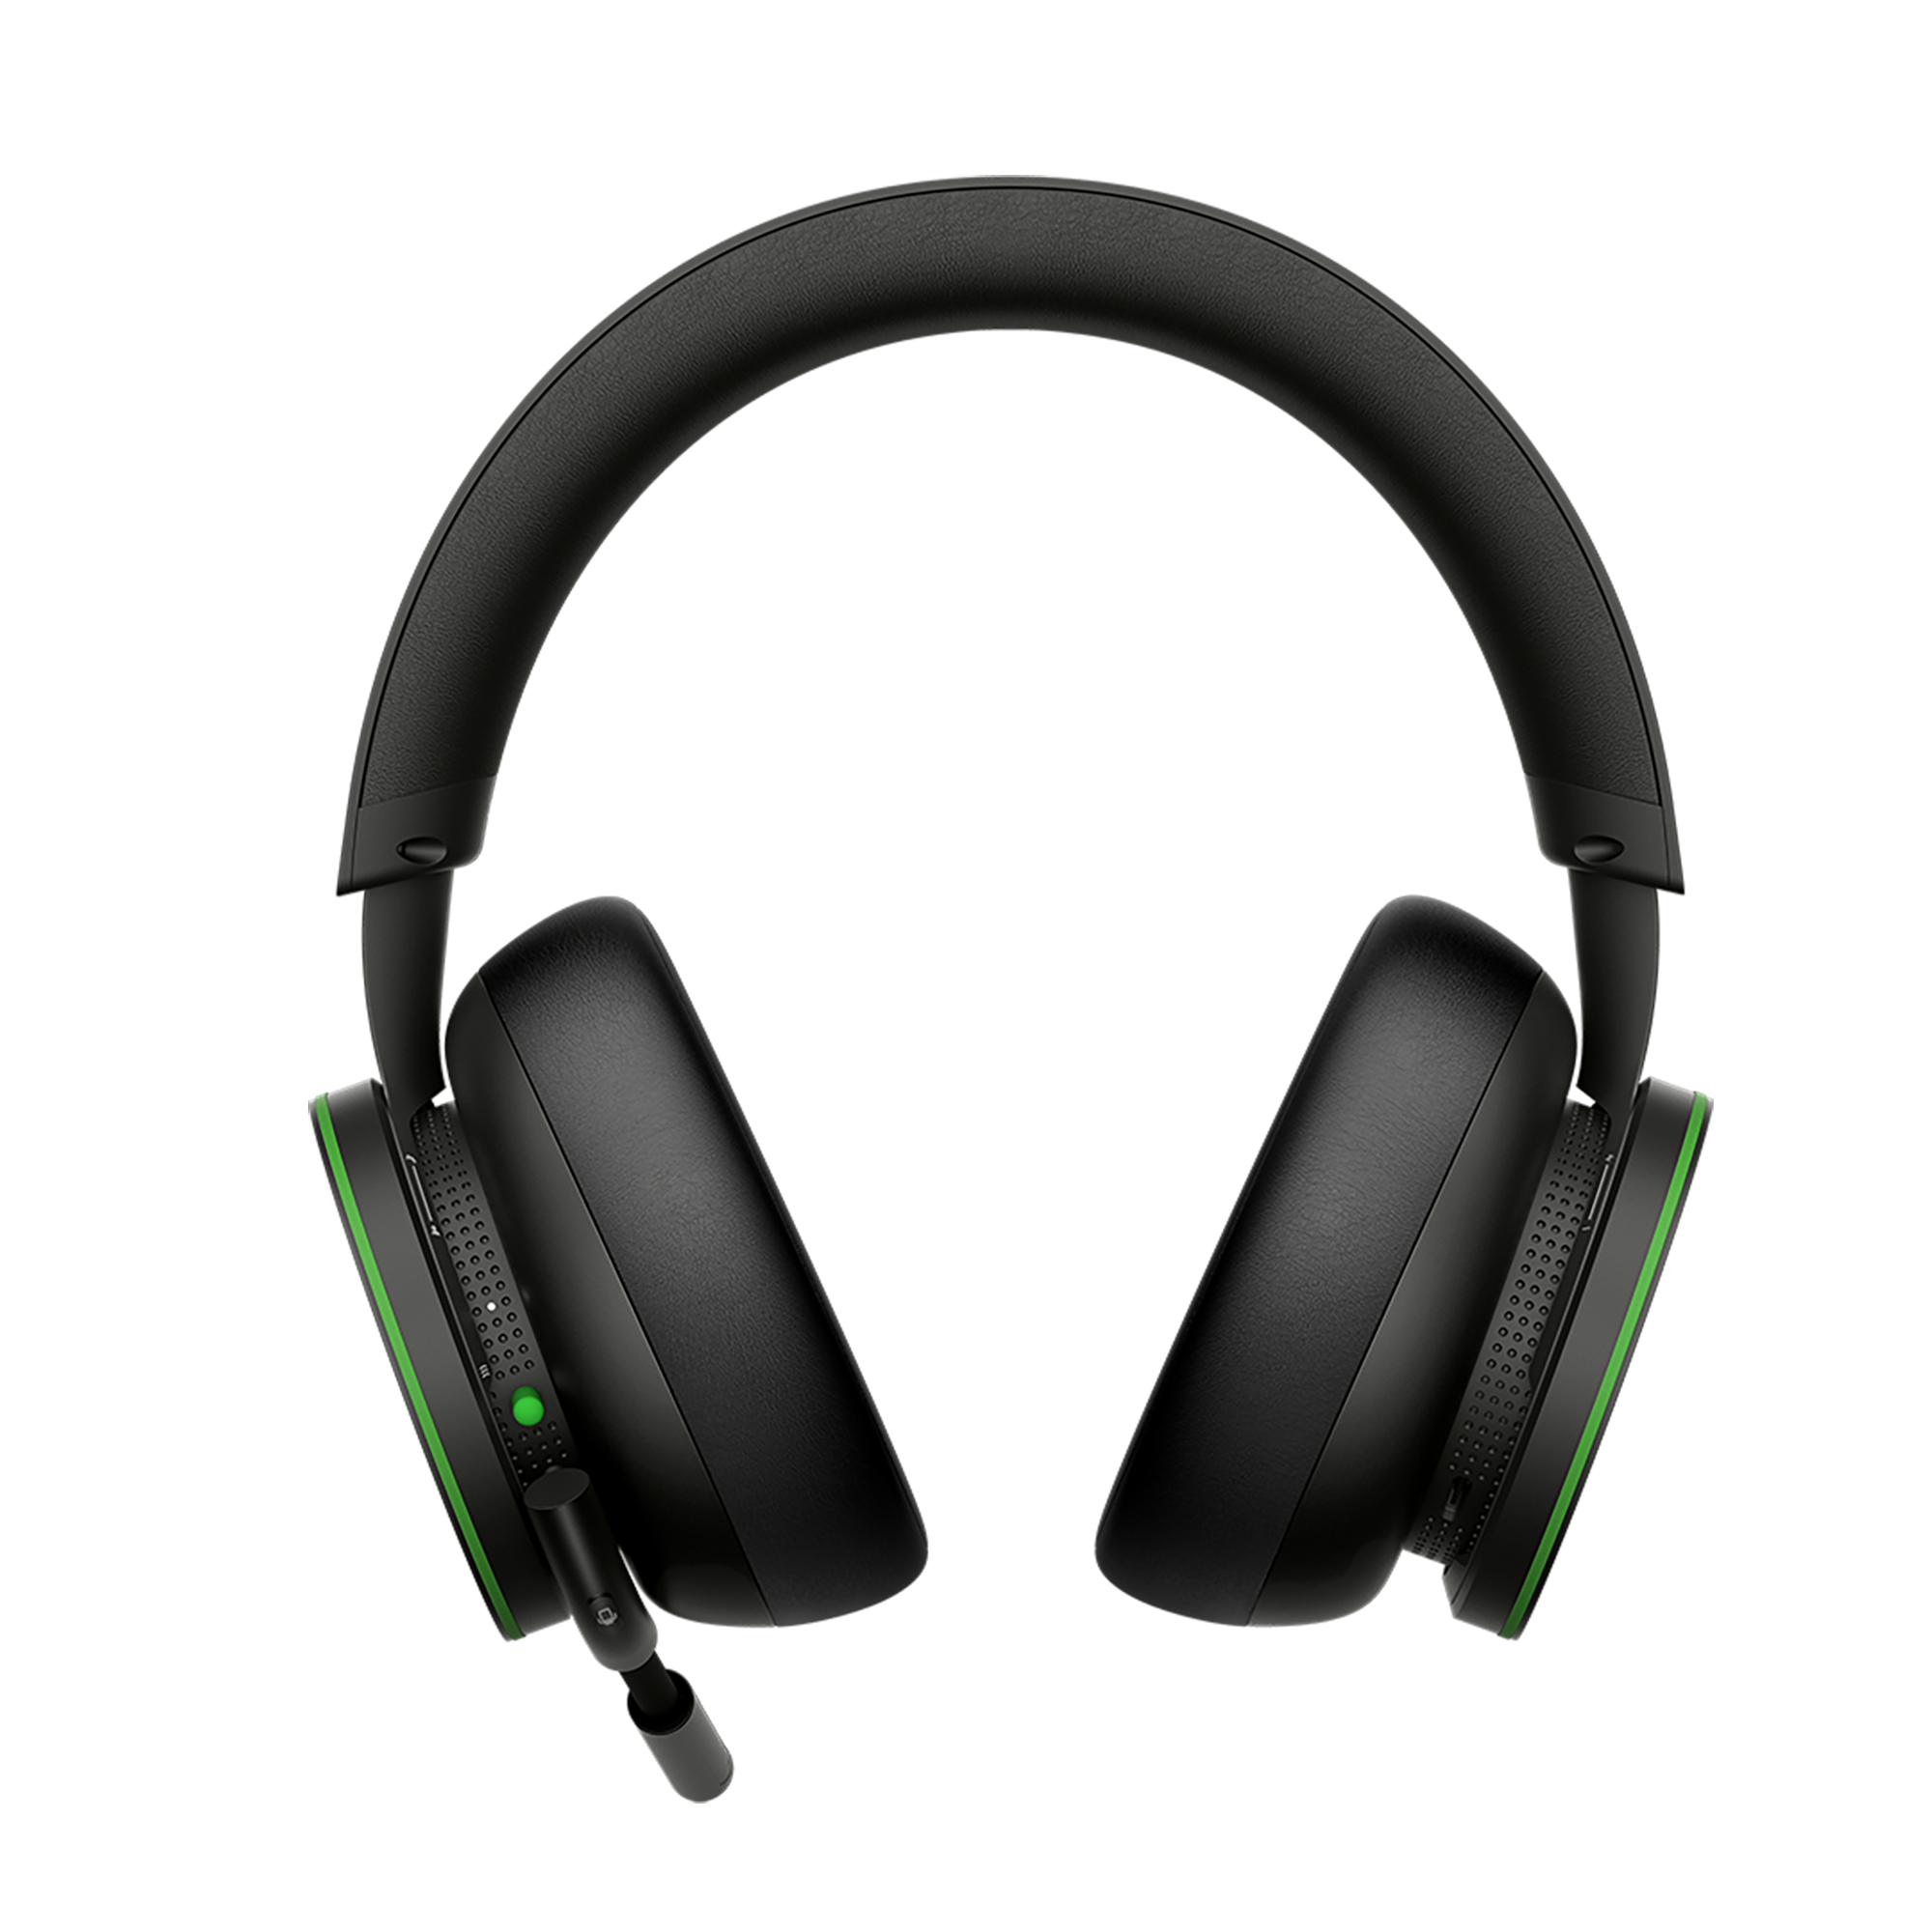 Microsoft Xbox Wireless Headset for Xbox Series X/S, Xbox One, and Windows 10 Devices - image 5 of 10